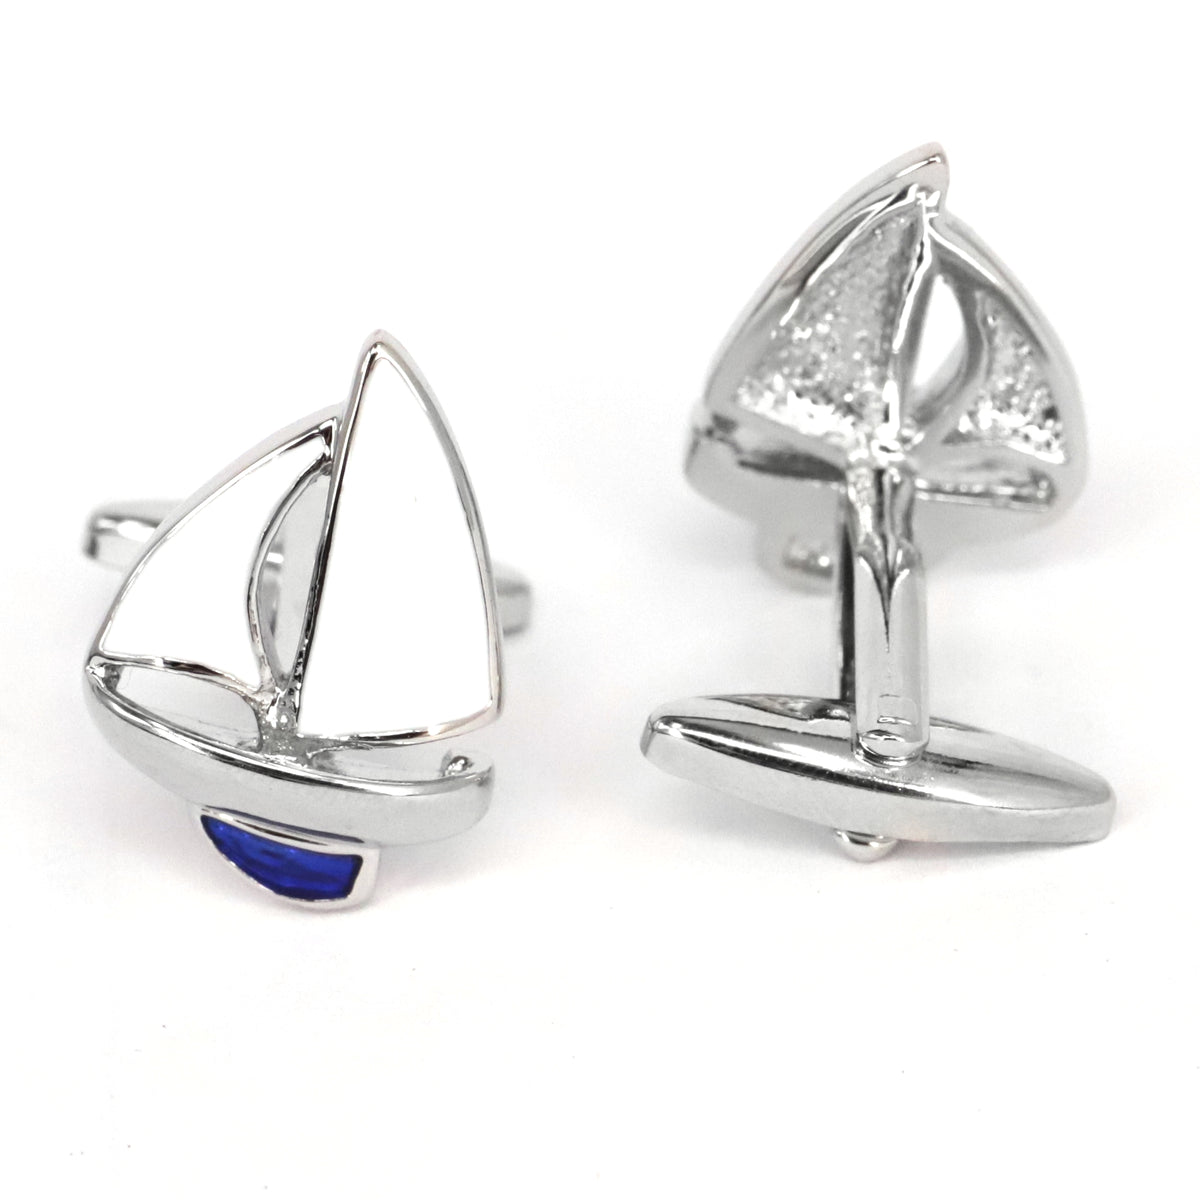 My Sail Boat - Yatch and Yacht Blue & White